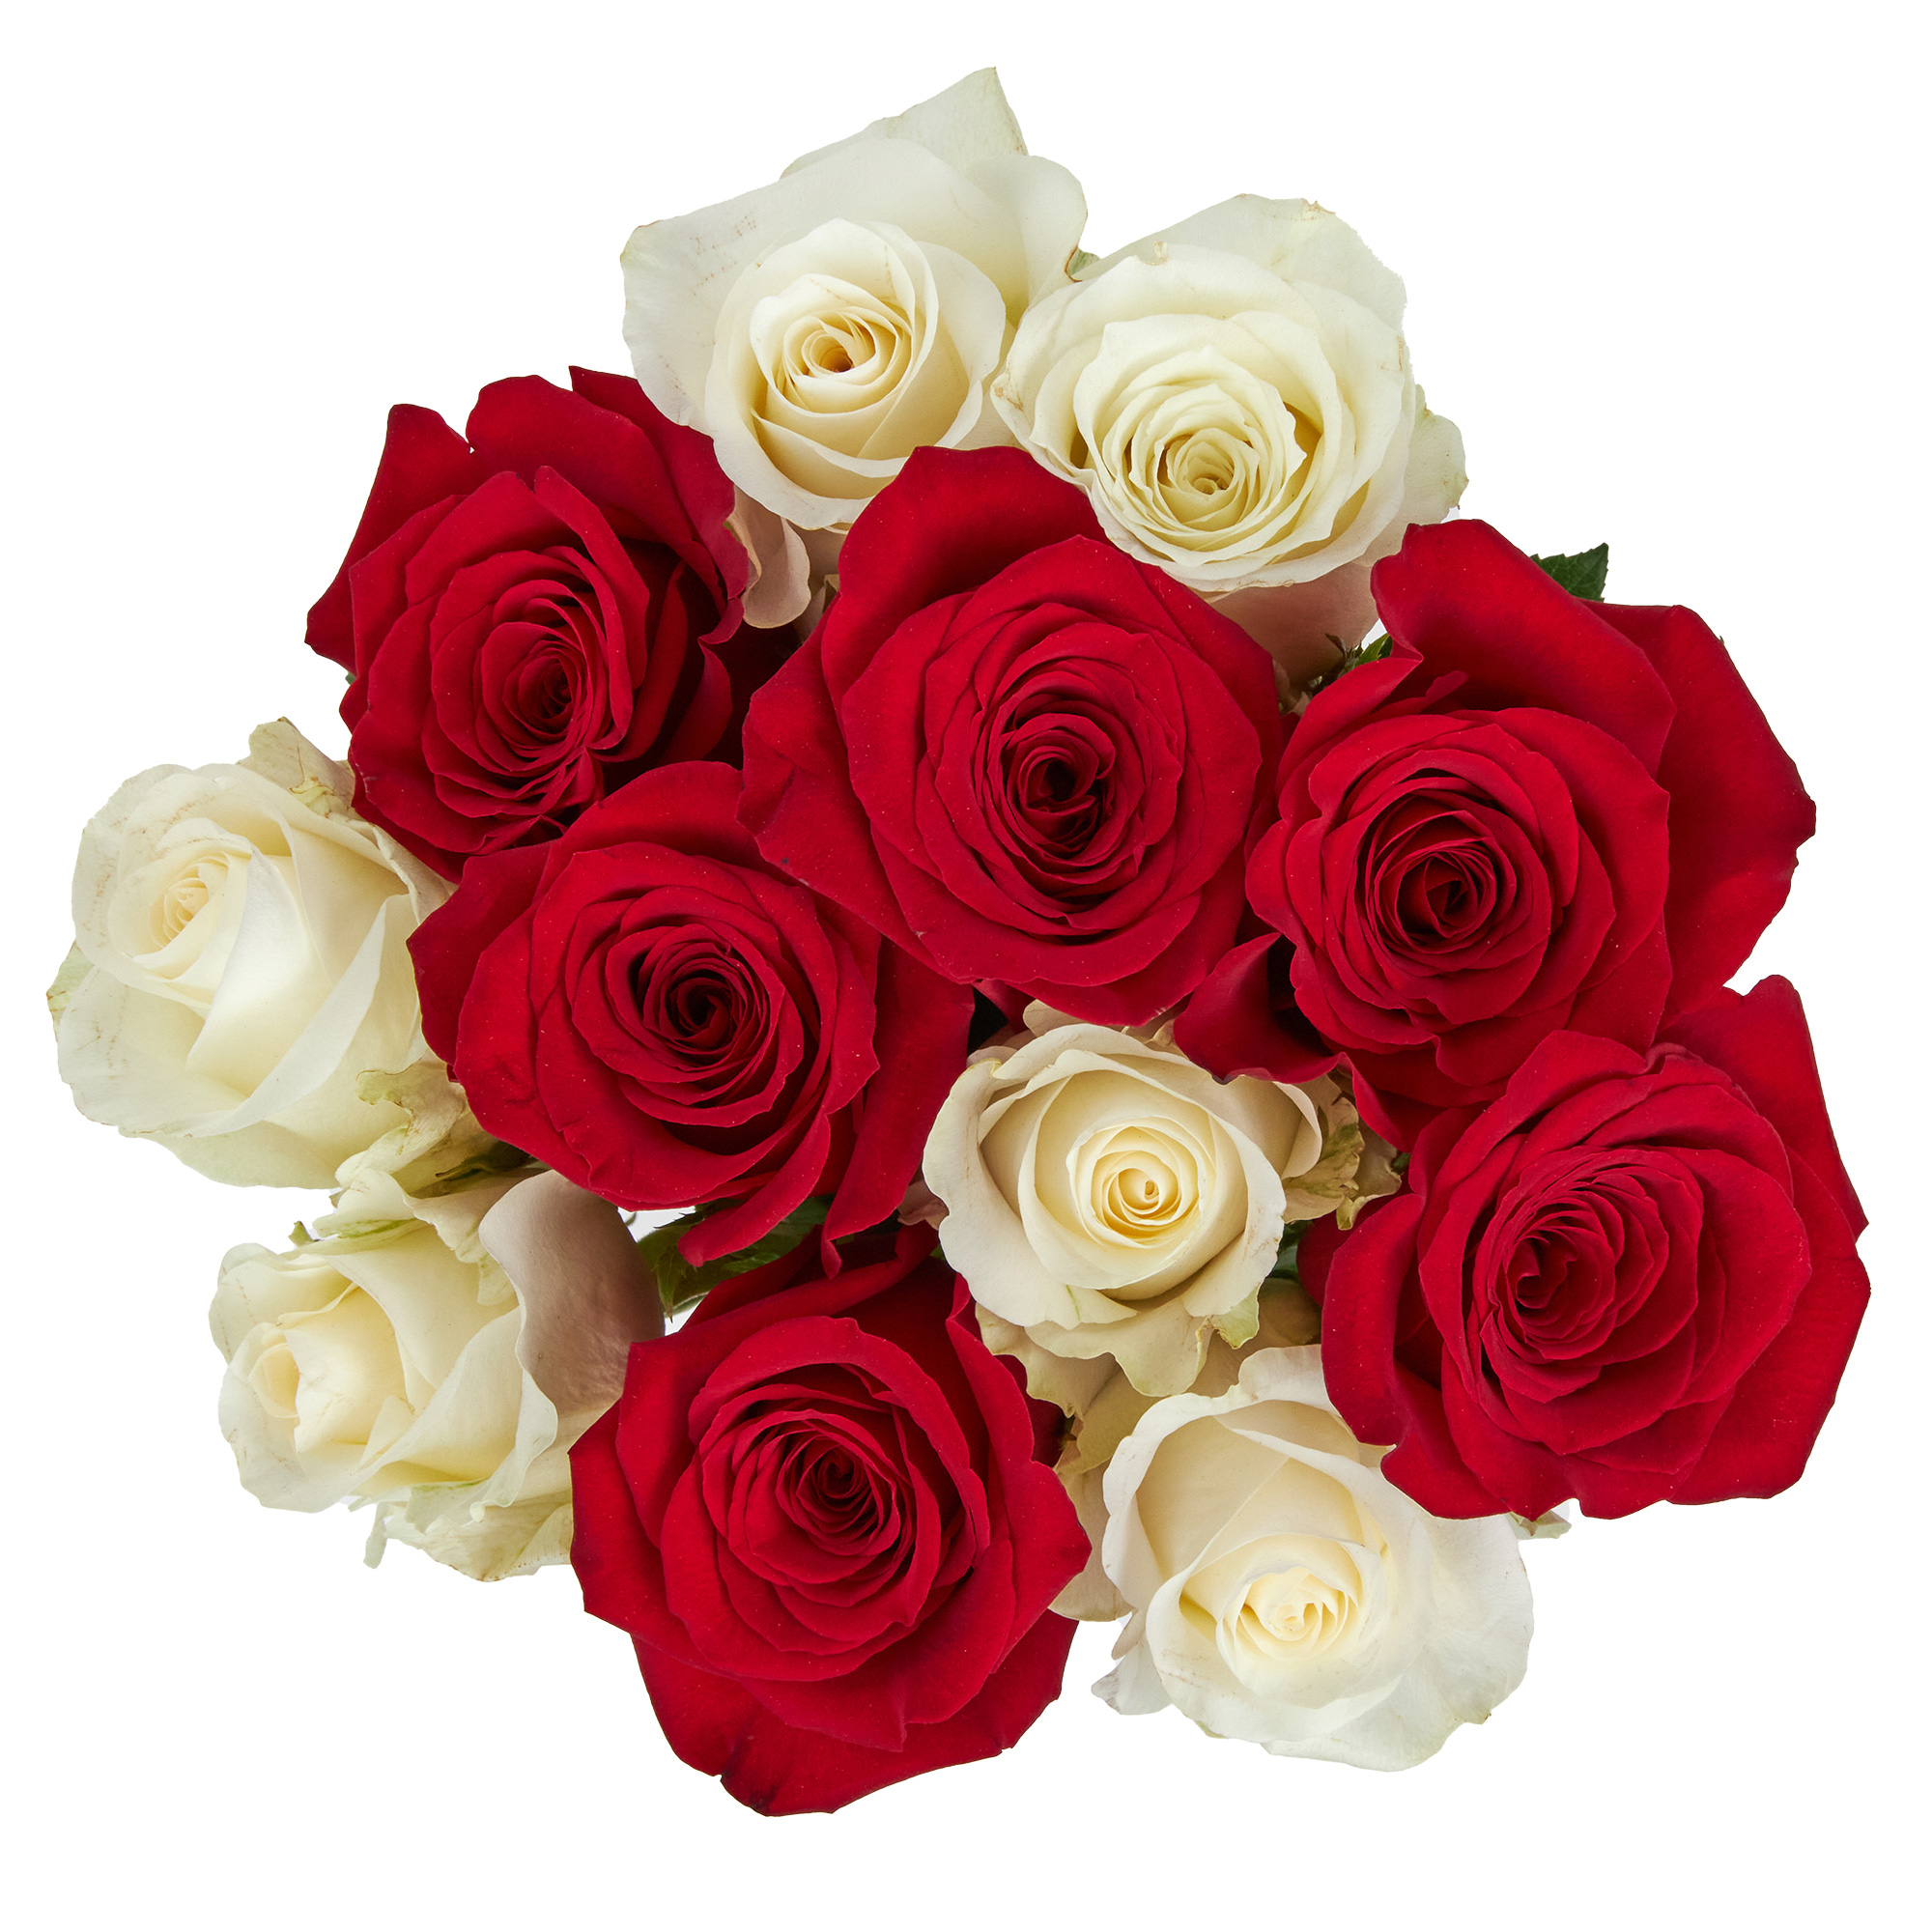 Fresh-Cut Dozen Roses, 12 Stems Assorted Rainbow Colors, Colors Vary - image 4 of 10